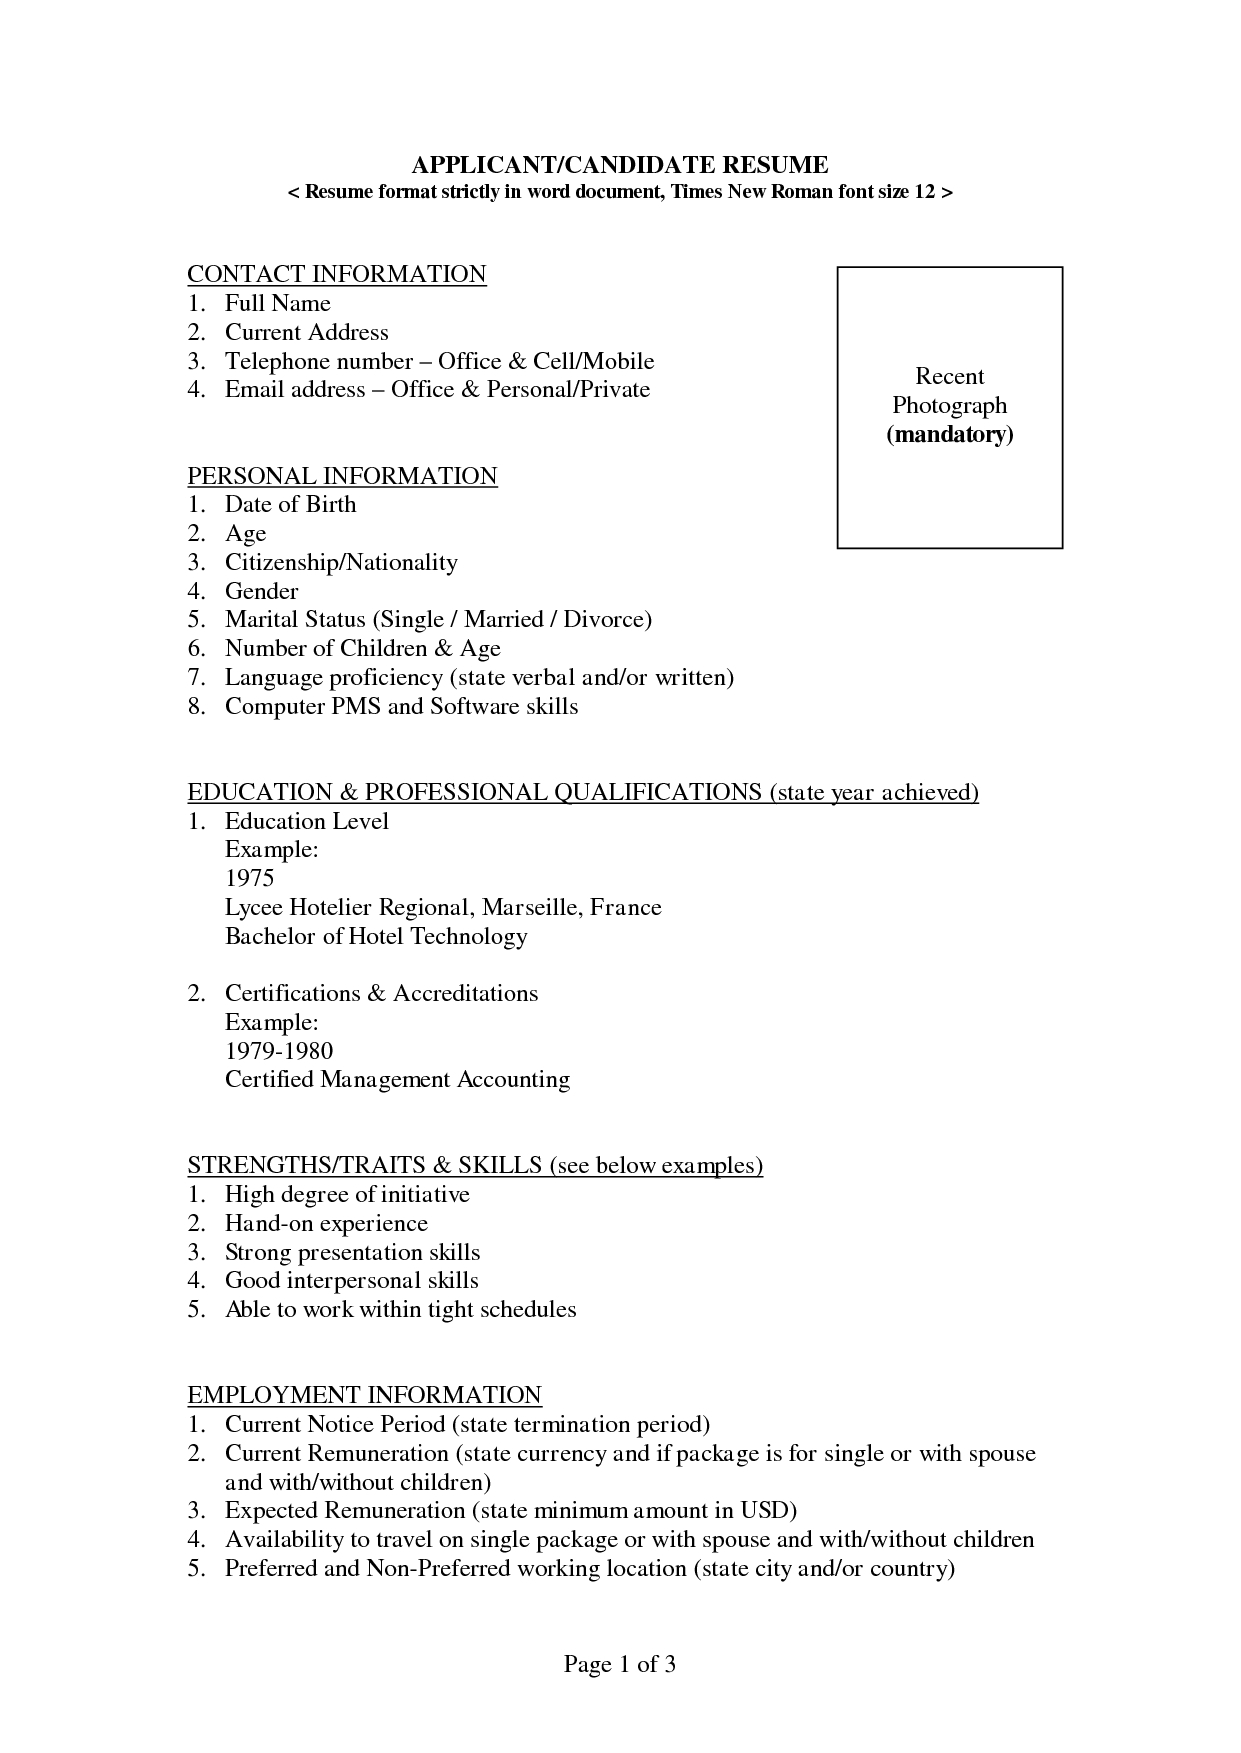 Free Blank Resume Templates For Microsoft Word | Resume Intended For Blank Resume Templates For Microsoft Word